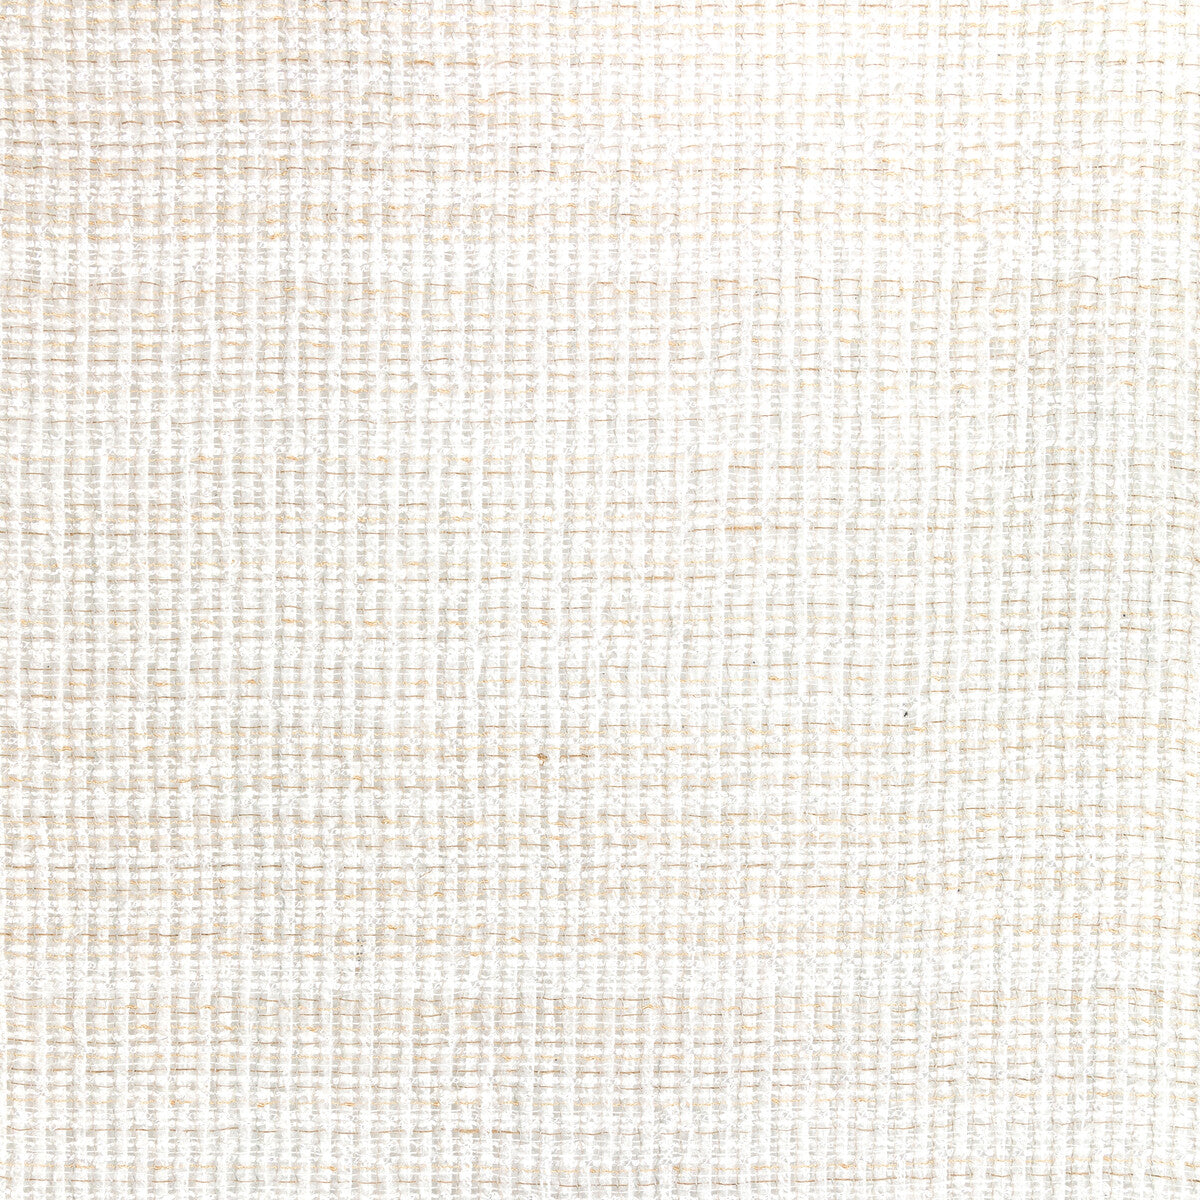 Soft Spoken fabric in white sand color - pattern 4889.1.0 - by Kravet Couture in the Modern Luxe III collection